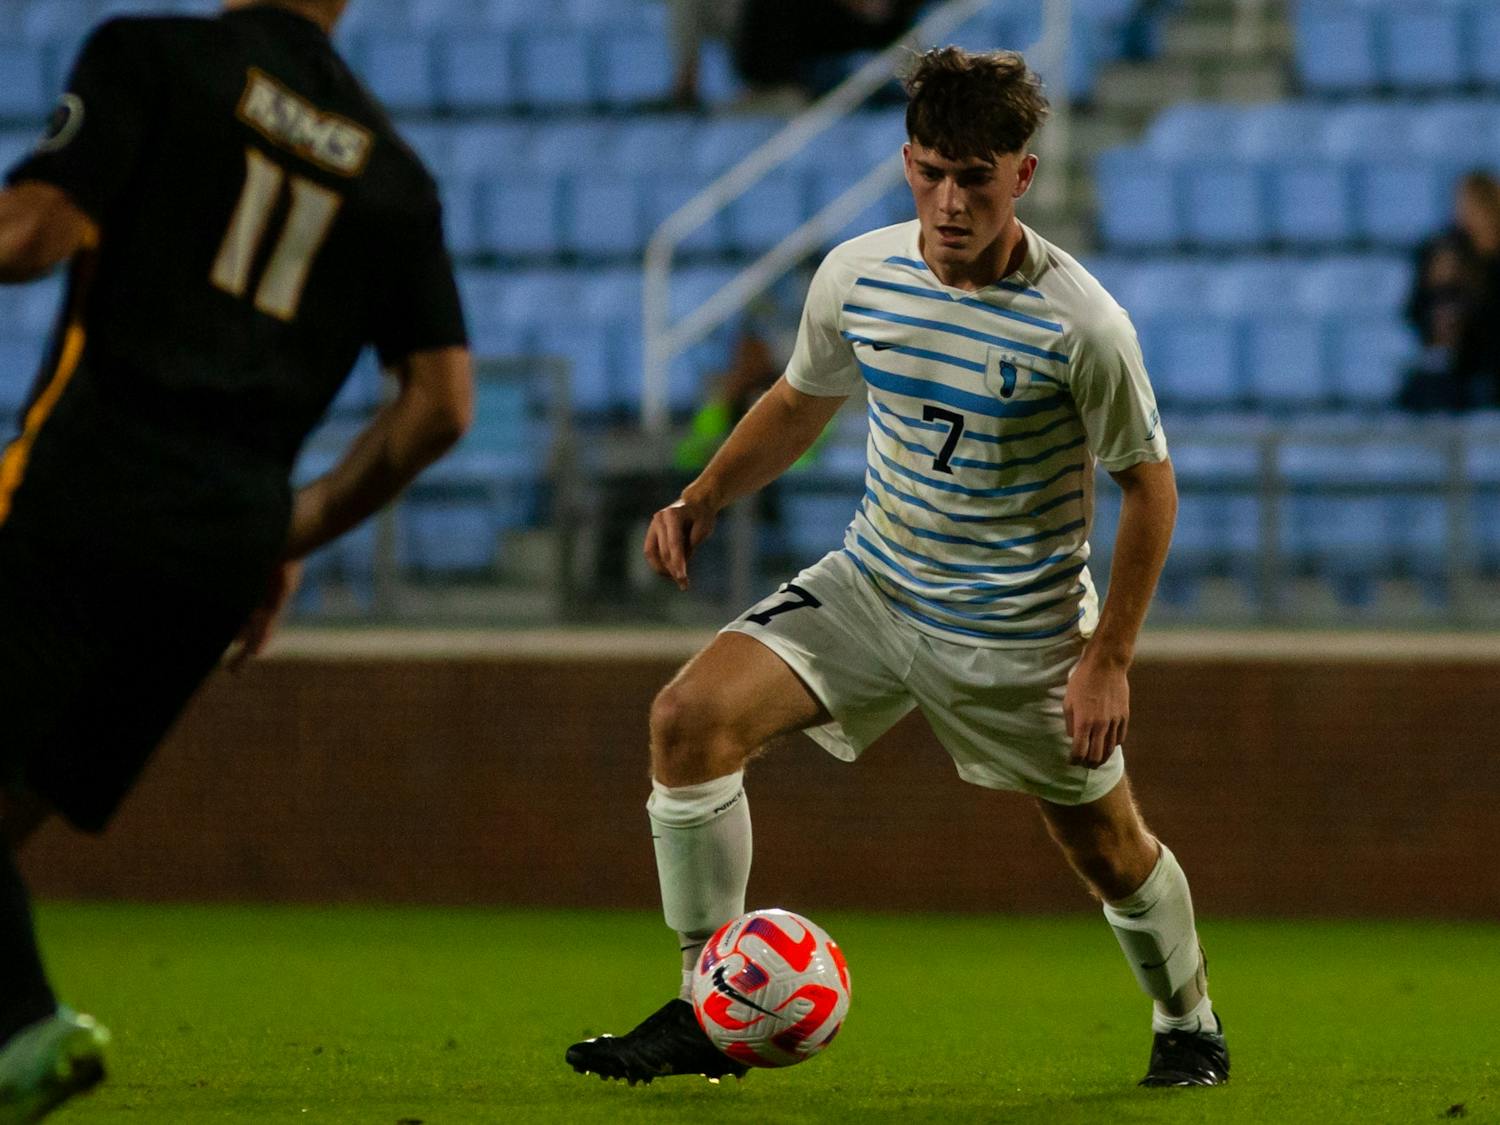 UNC first-year midfielder Sam Williams (7) defends the ball during UNC's 1-0 victory against VCU on Tuesday, Oct. 11, 2022, at Dorrance Field.